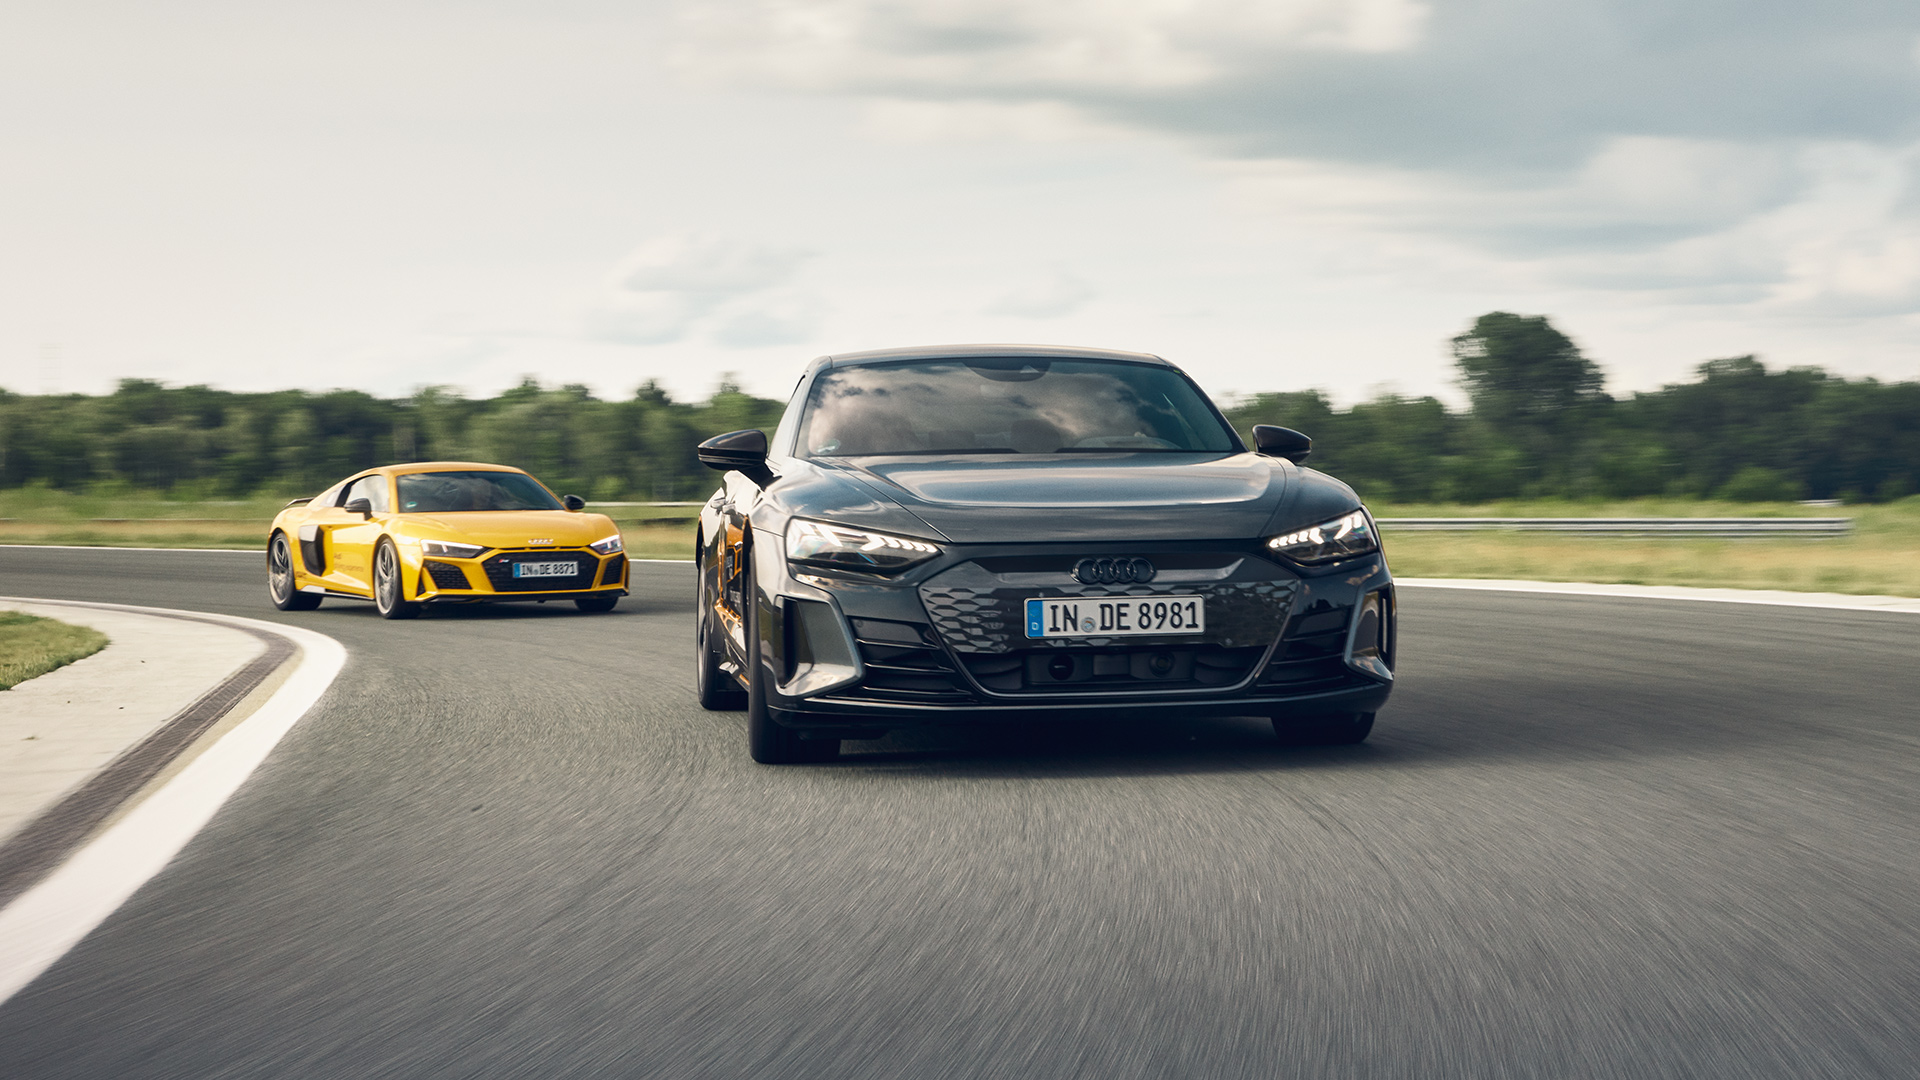 Yellow R8 Coupé V10 performance quattro and gray RS e-tron GT on the race track, RS e-tron GT leads the way